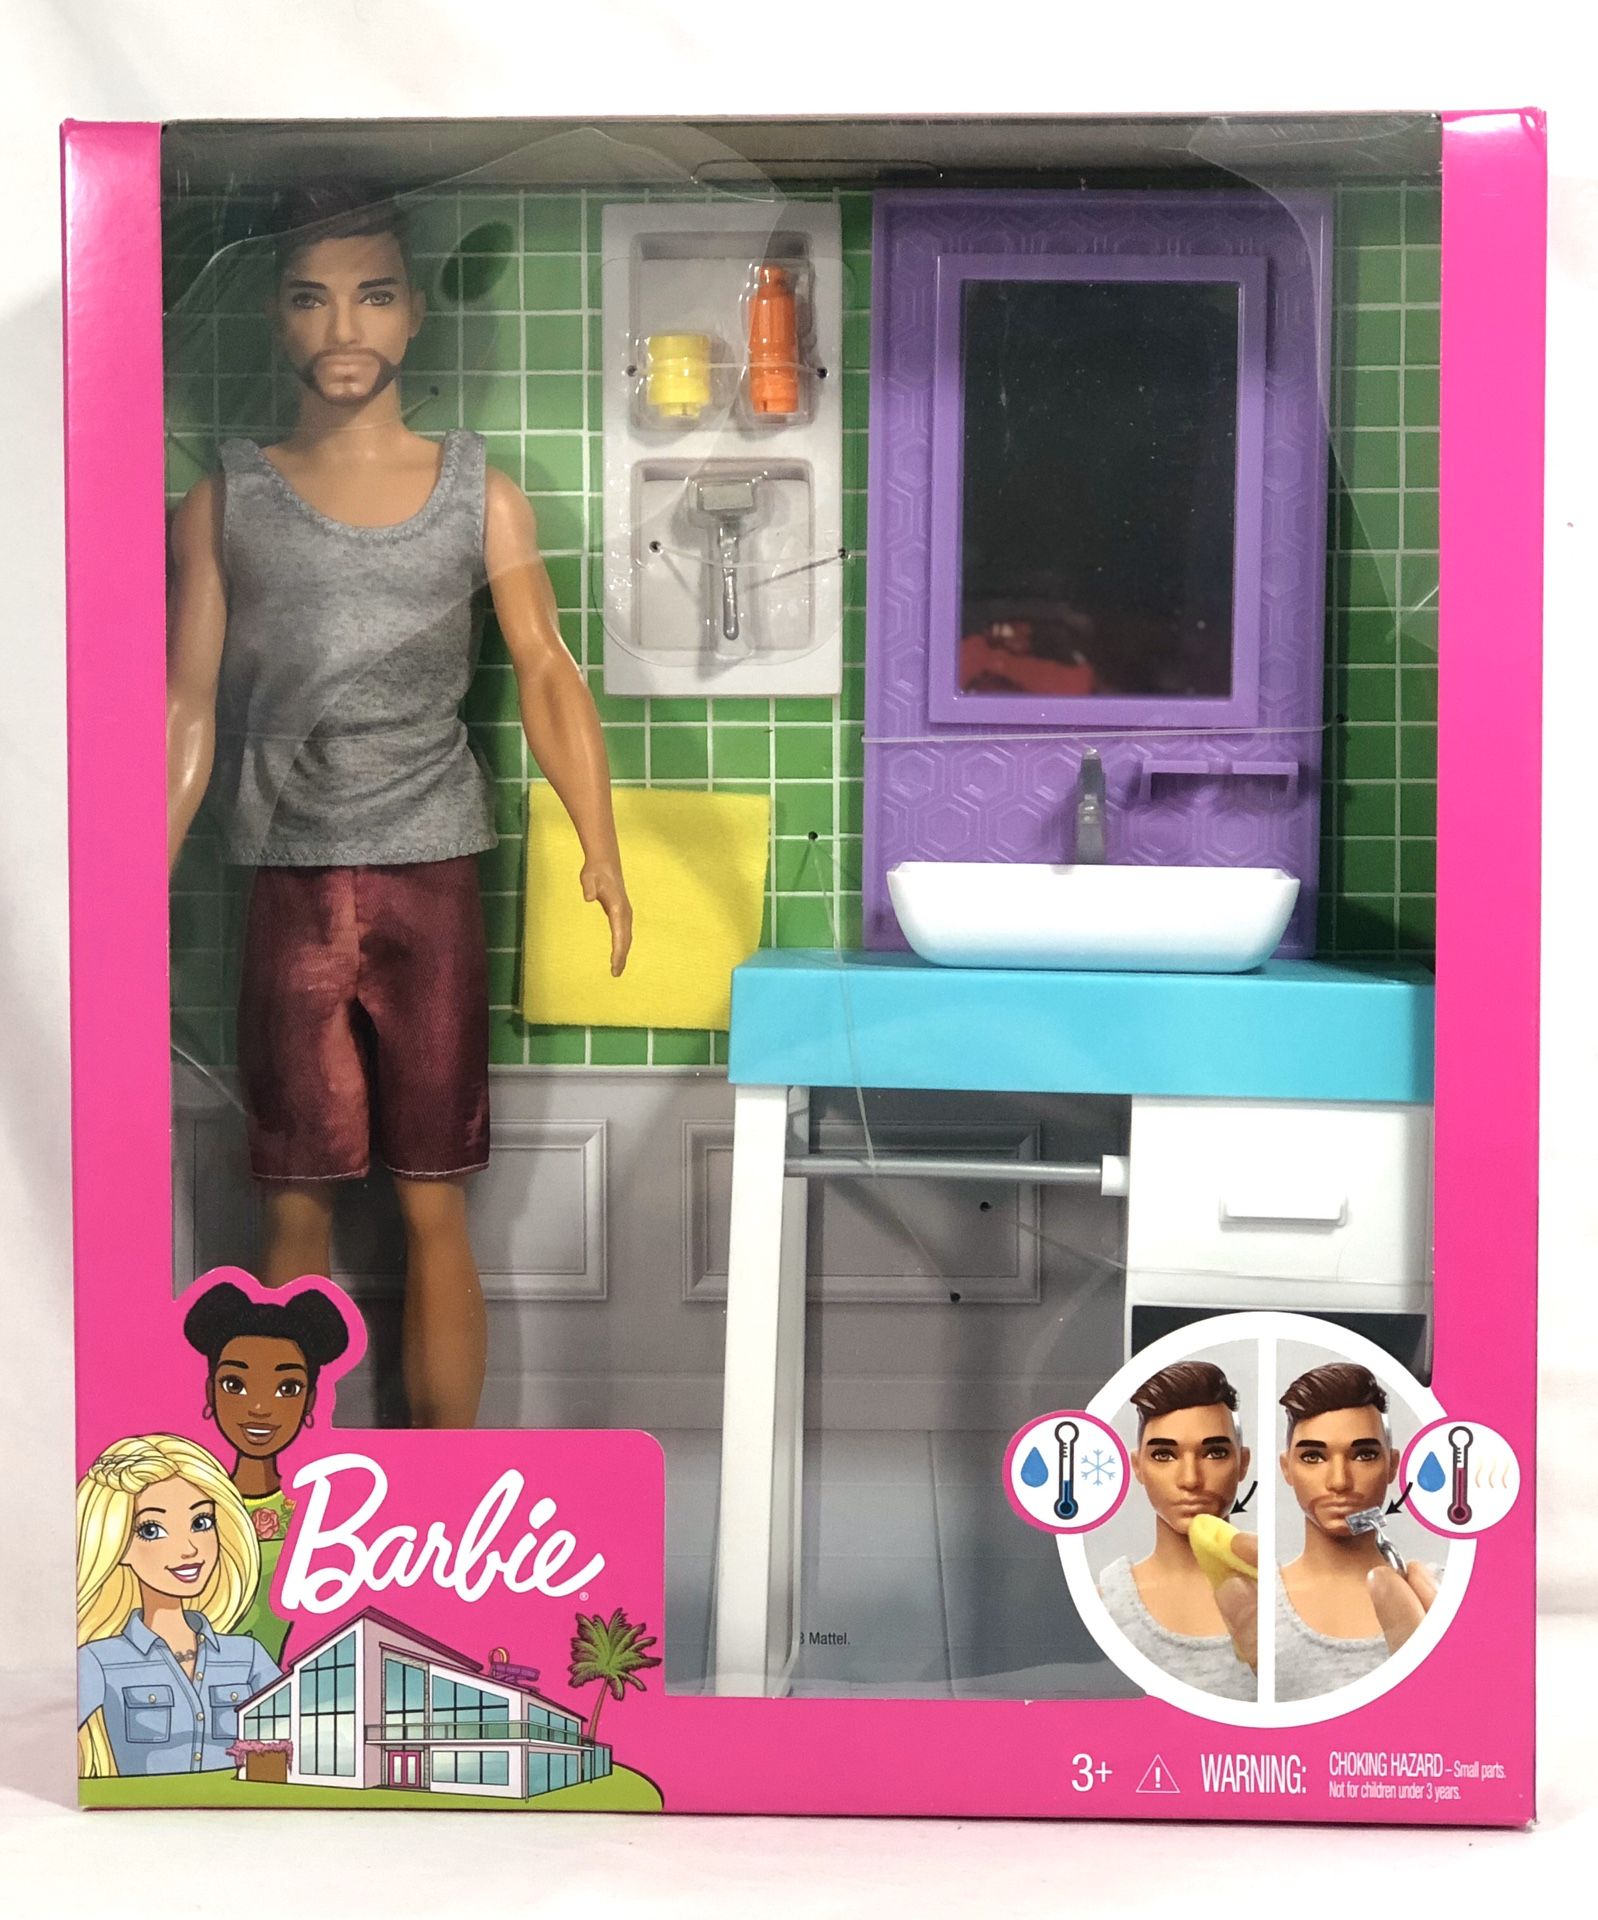 Barbie Bathroom Themed Playset with Shaving Ken Doll and Sink/Mirror.